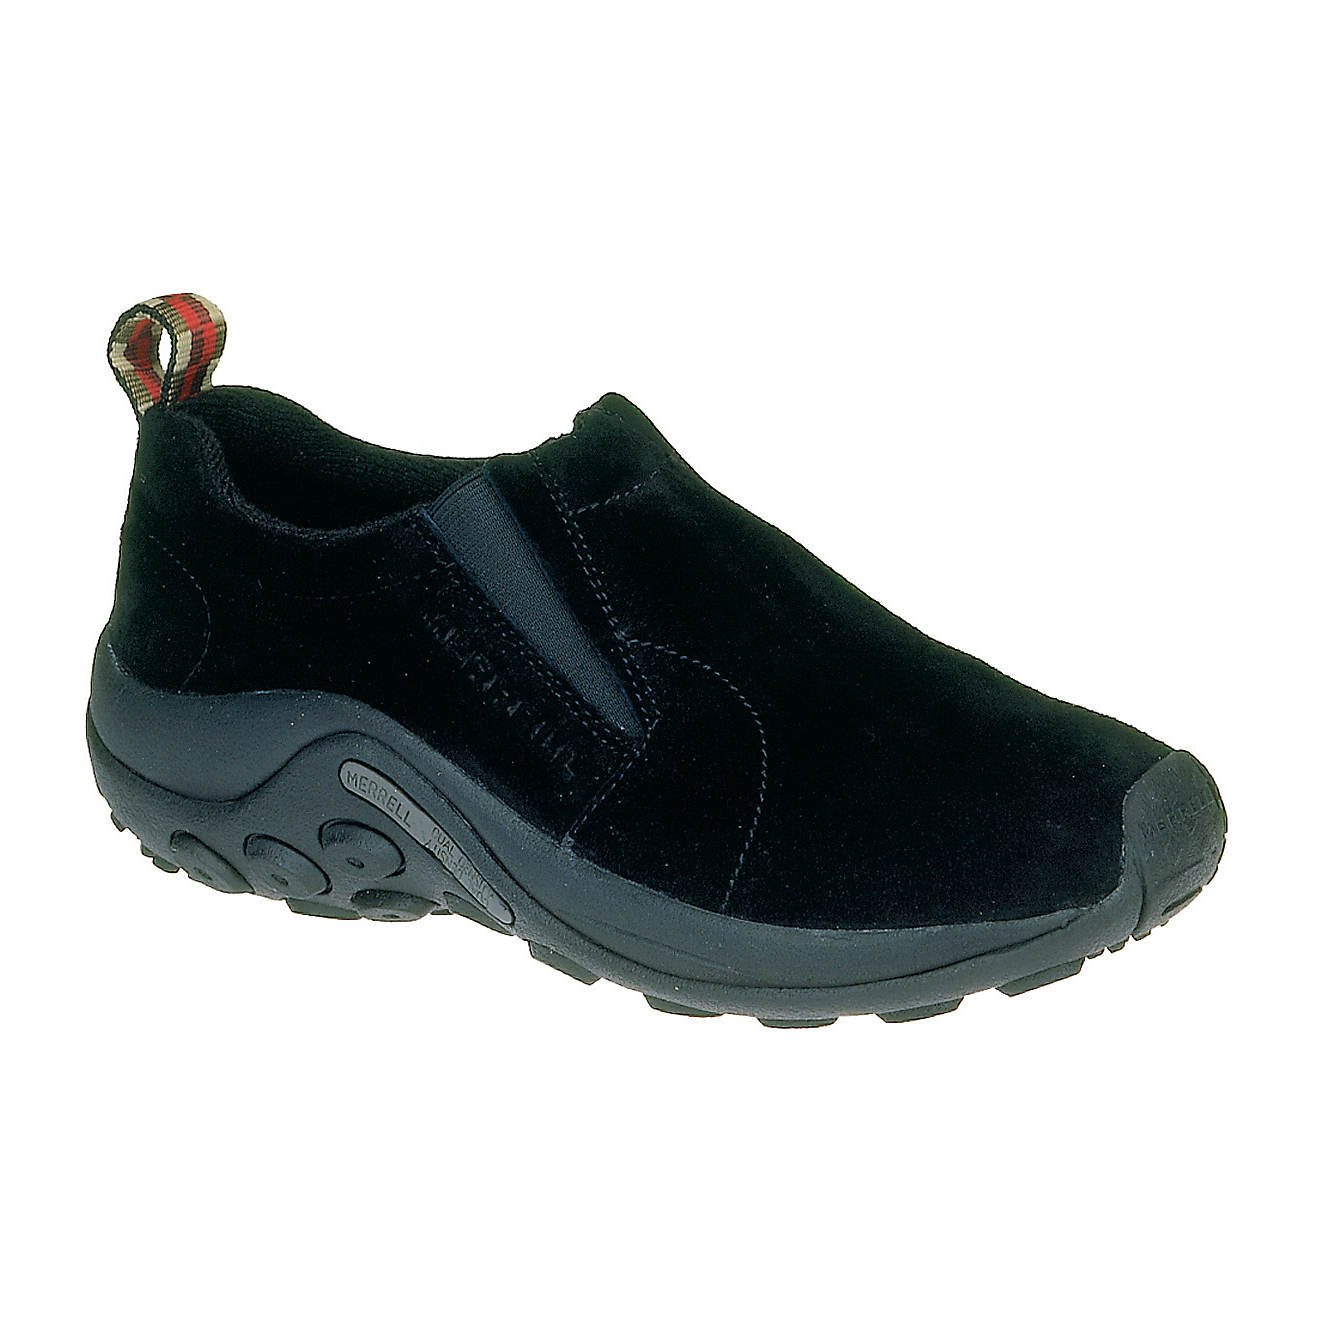 Merrell Women's Jungle Moc Shoes | Free Shipping at Academy